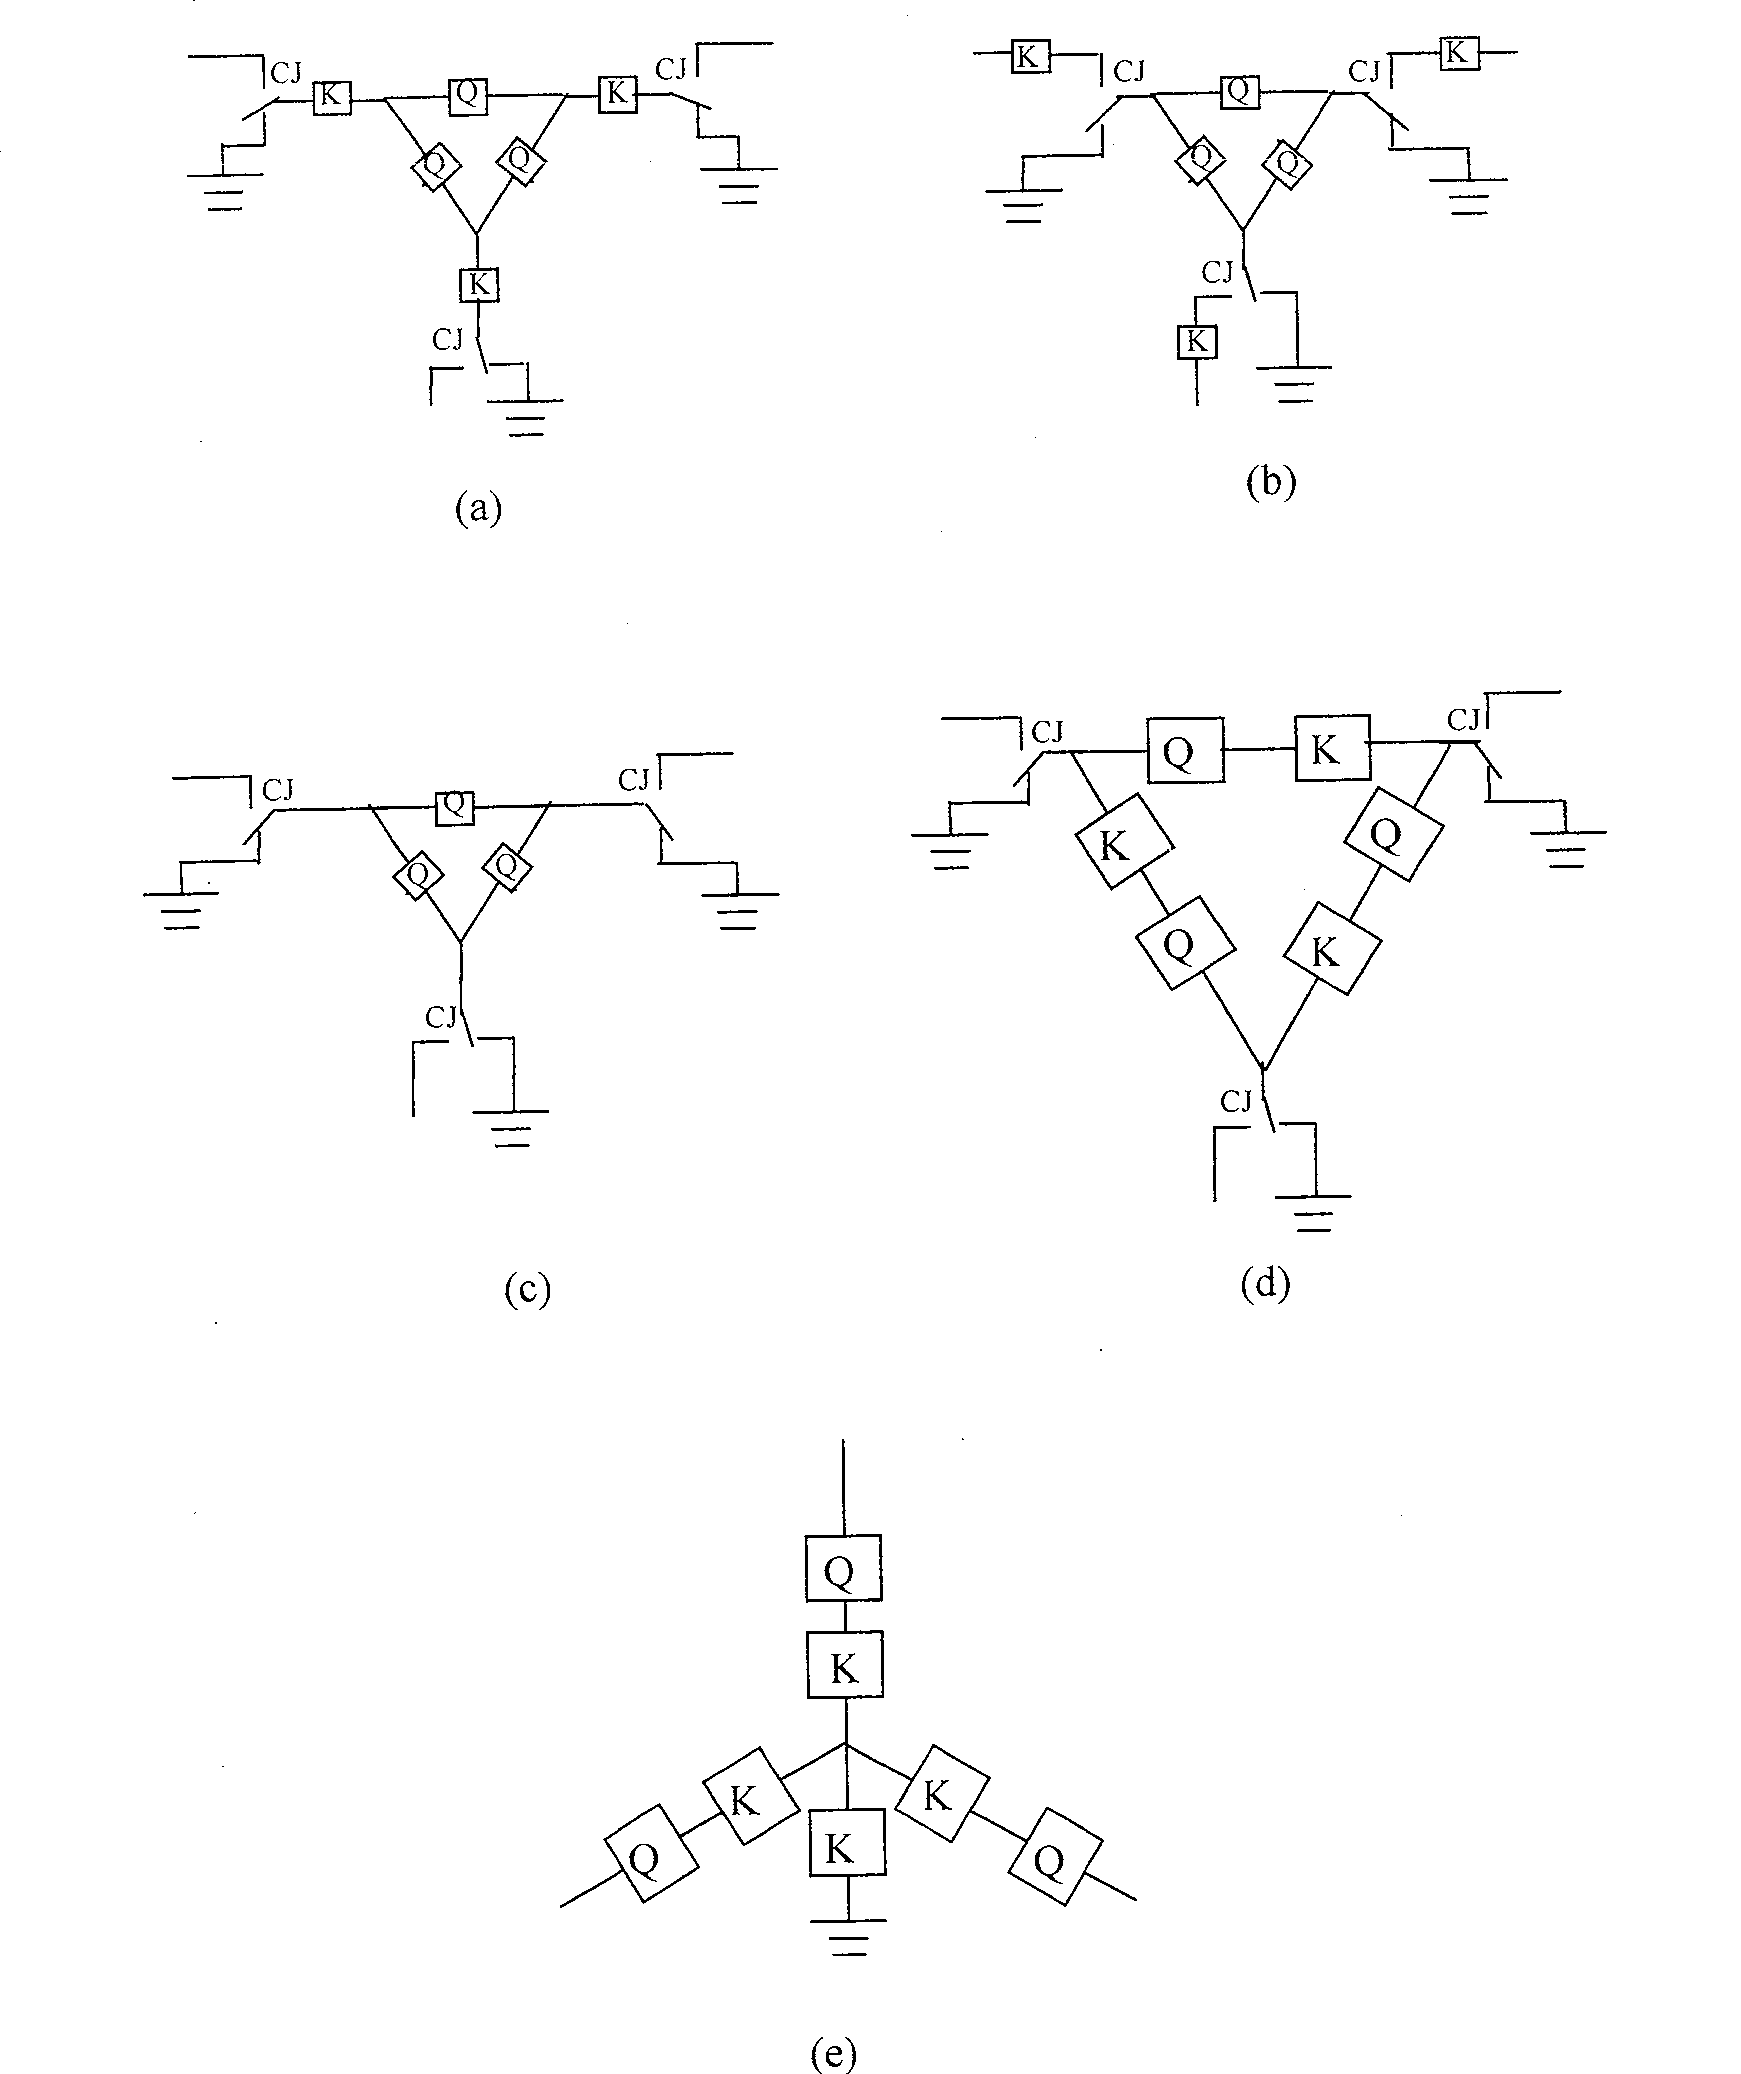 Apparatus for effectively compensating three-phase unbalance load and reactive power